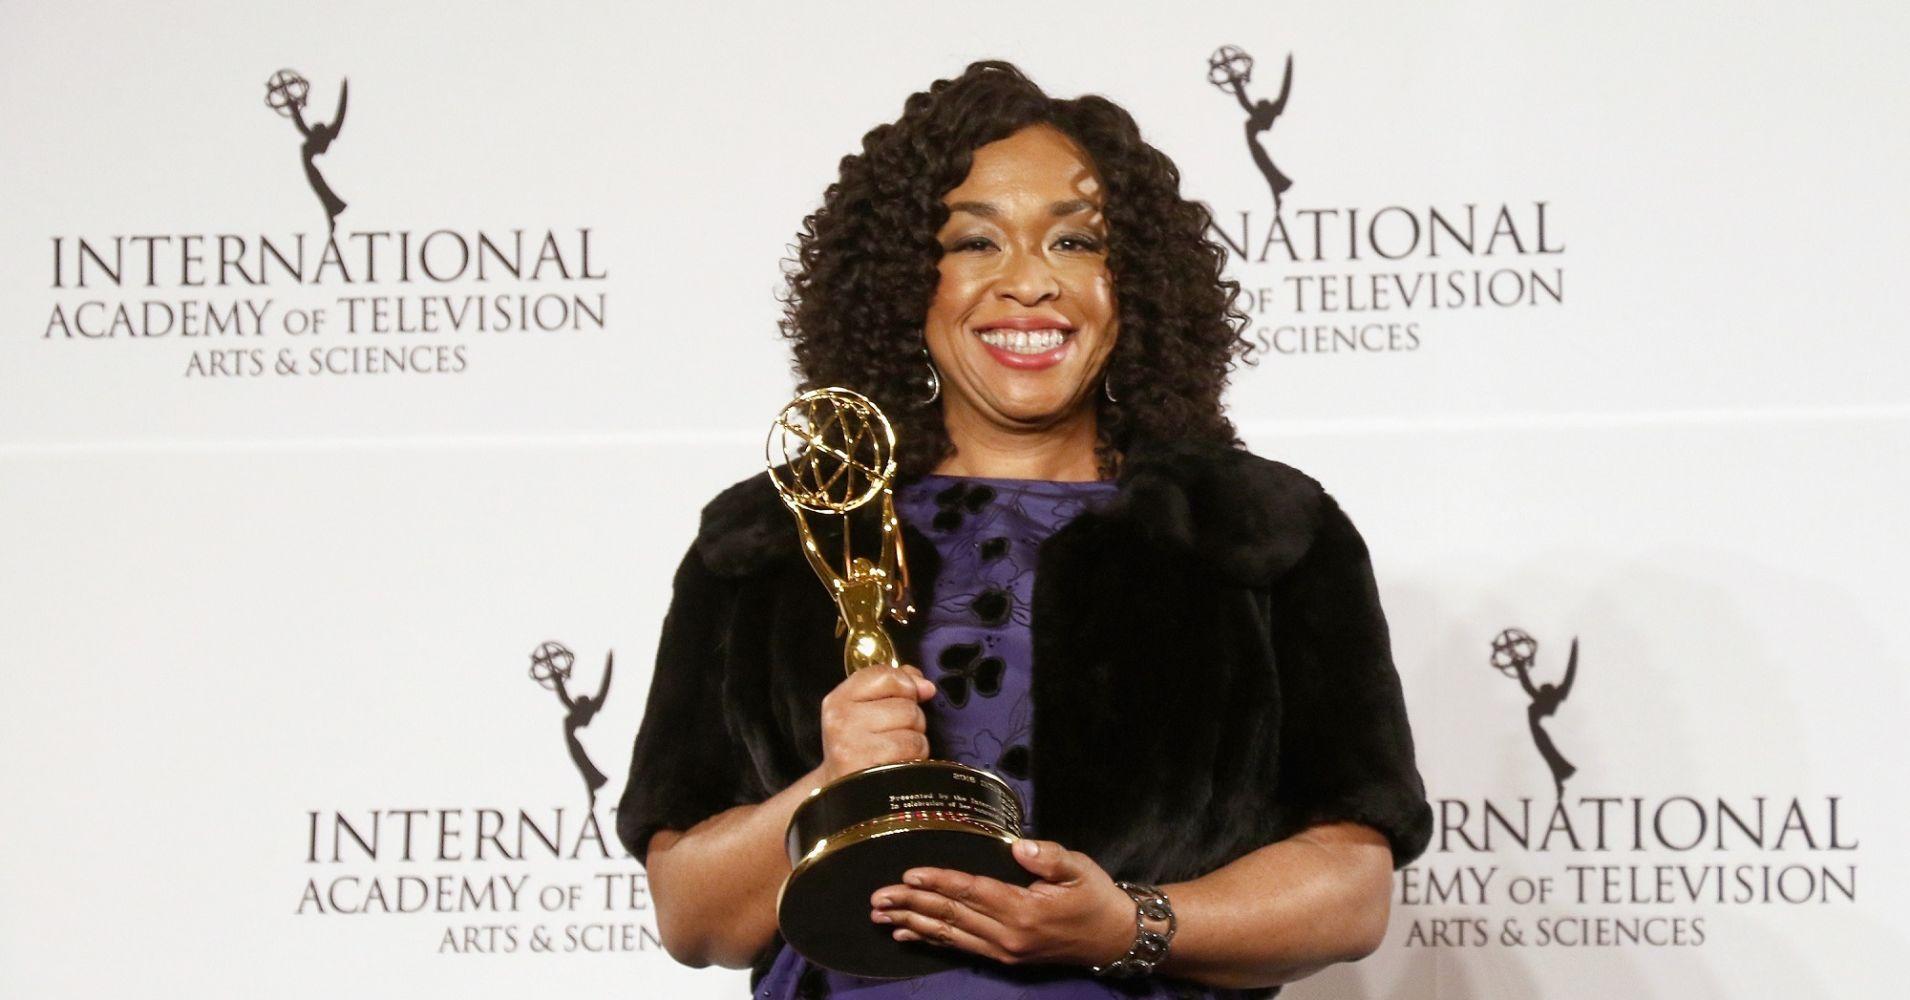 Shonda Rhimes shares her secret for staying happy and avoiding burnout